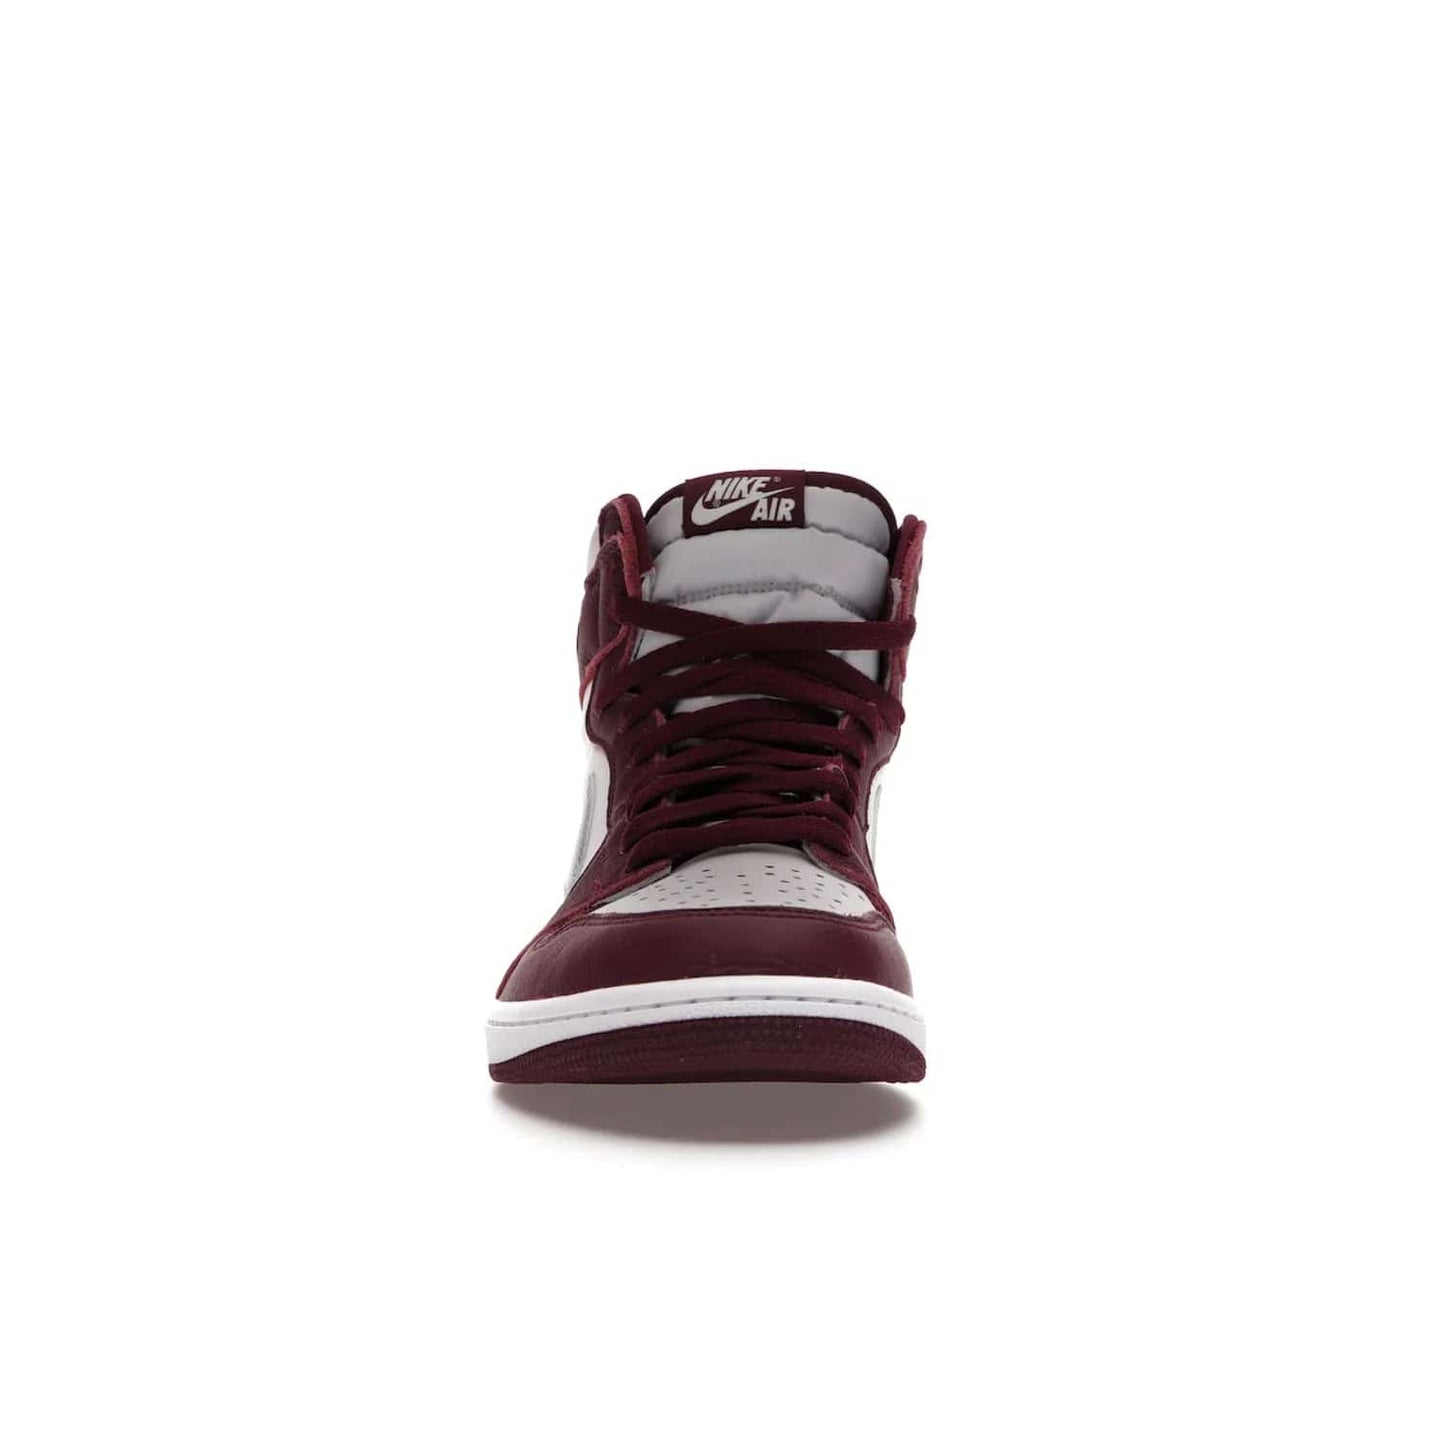 Jordan 1 Retro High OG Bordeaux - Image 10 - Only at www.BallersClubKickz.com - Shop the classic Air Jordan 1 High Bordeaux with a modern high-top cut. The timeless Bordeaux and White-Metallic Silver colorway, releasing Nov 20, 2021, is perfect for practice or a night out.